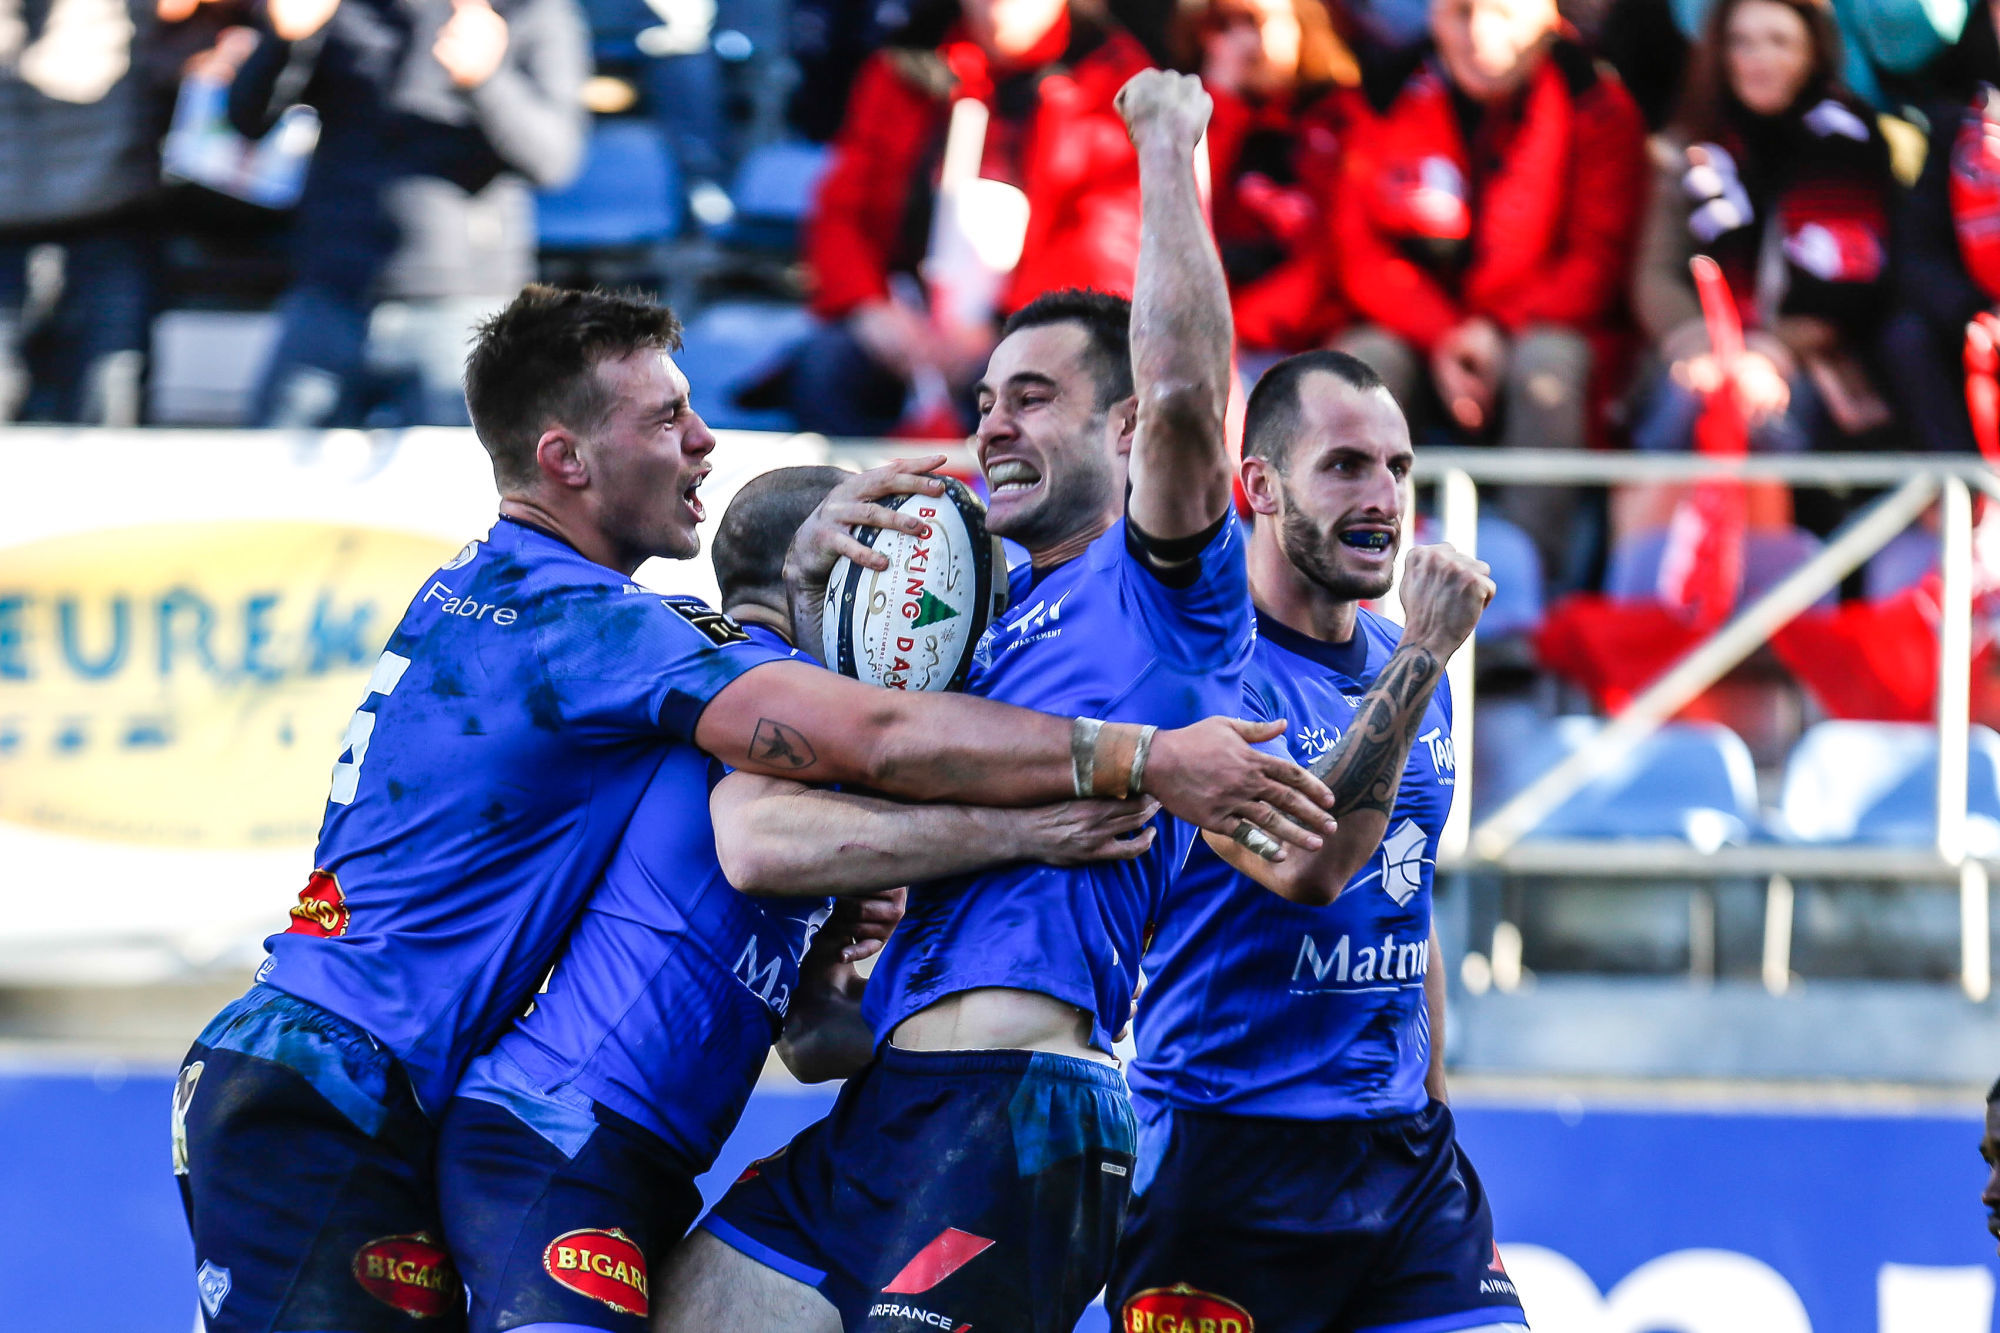 Team Castres celebrate during the Top 14 match between Castres and Lyon at Stade Pierre-Fabre on December 21, 2019 in Castres, France. (Photo by Laurent Frezouls/Icon Sport) - Stade Pierre Fabre - Castres (France)